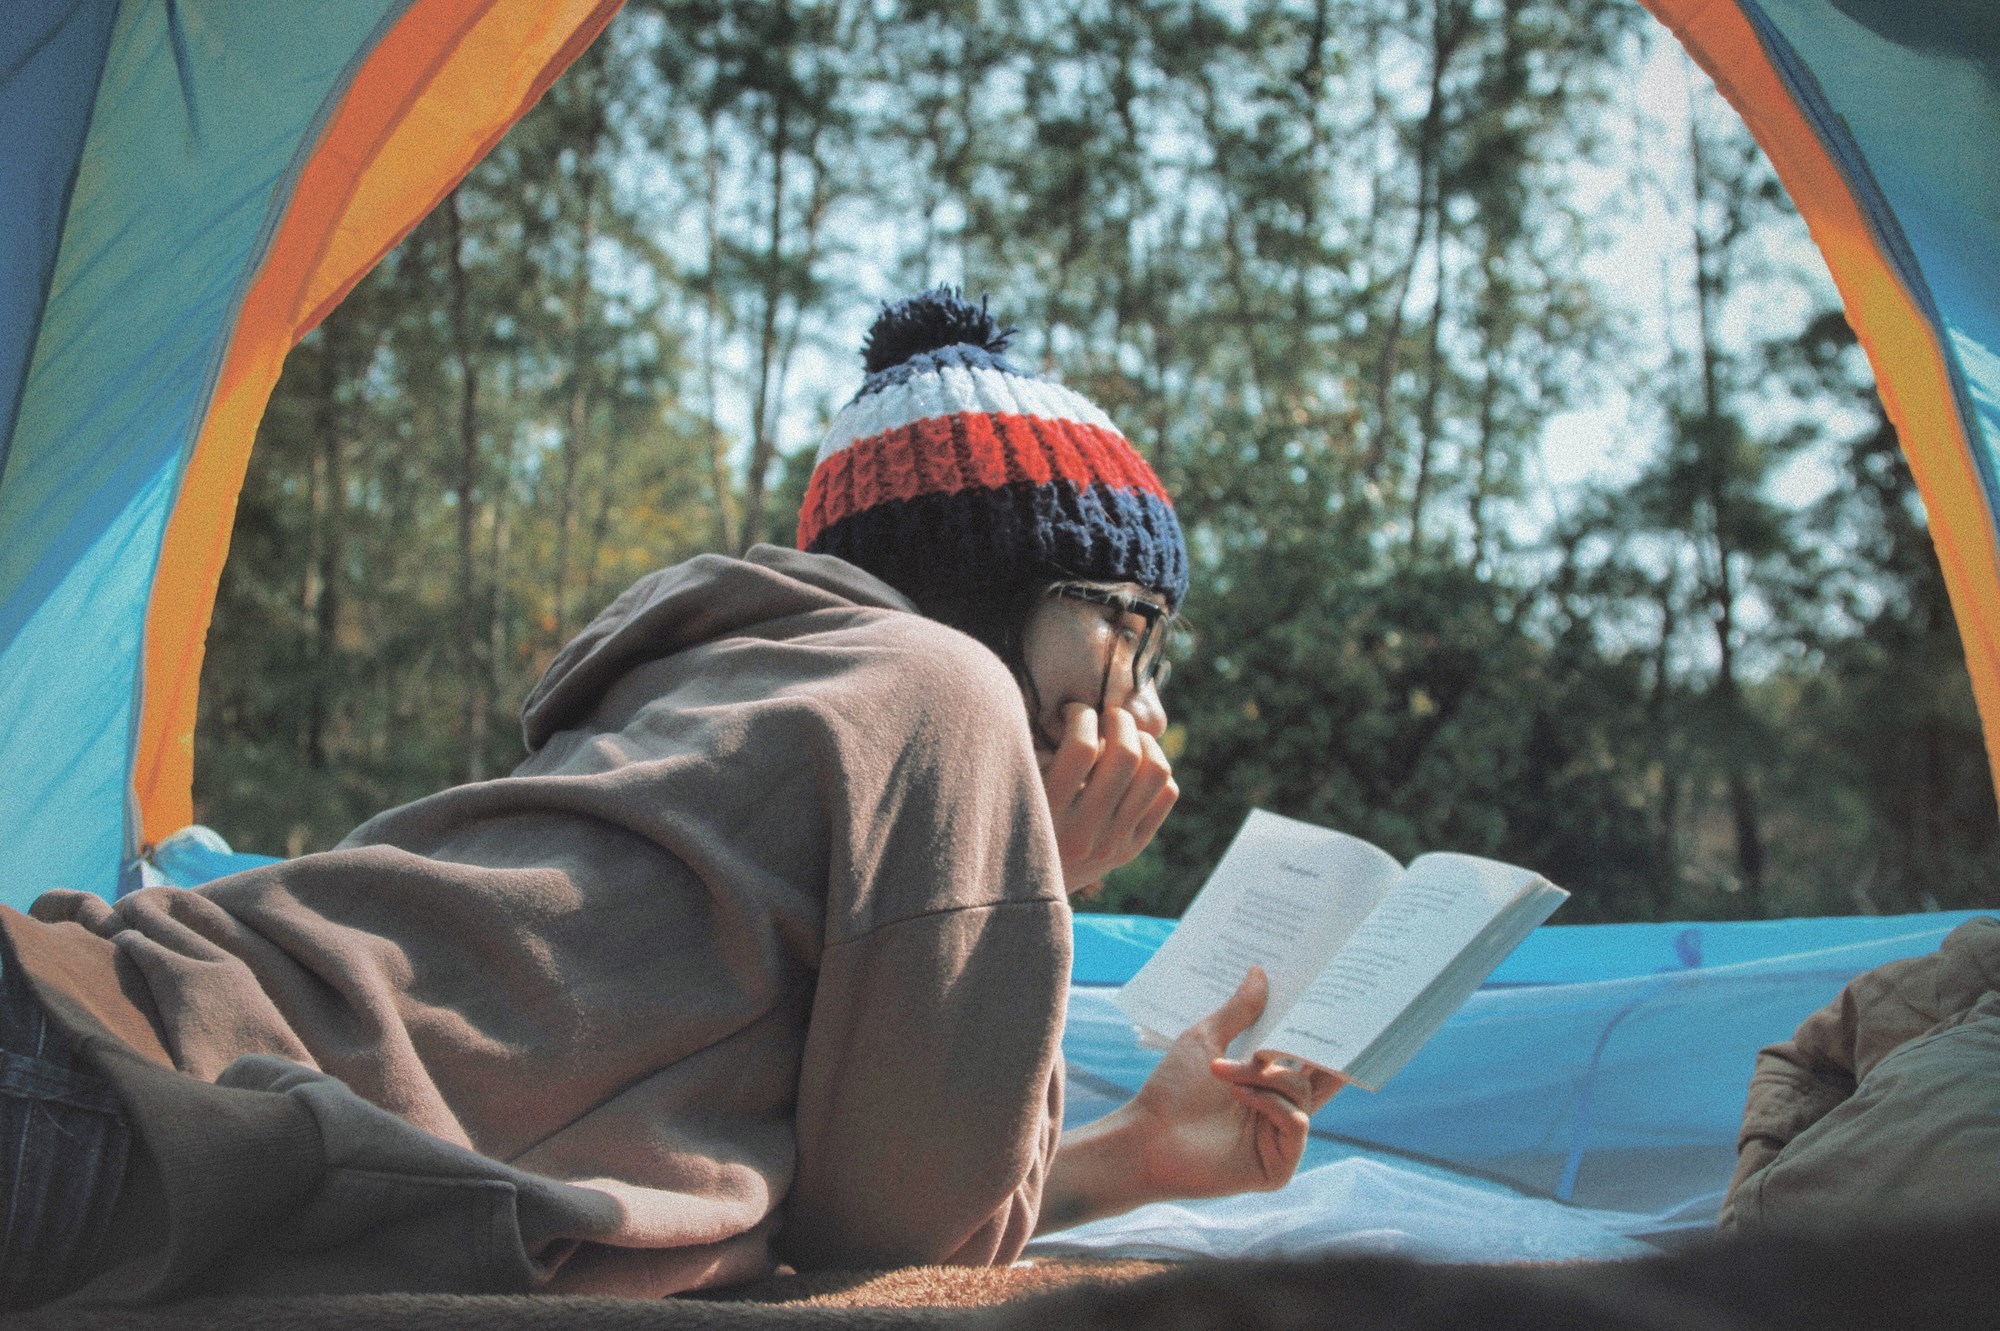 Woman Reading a Book in a tent facing forest